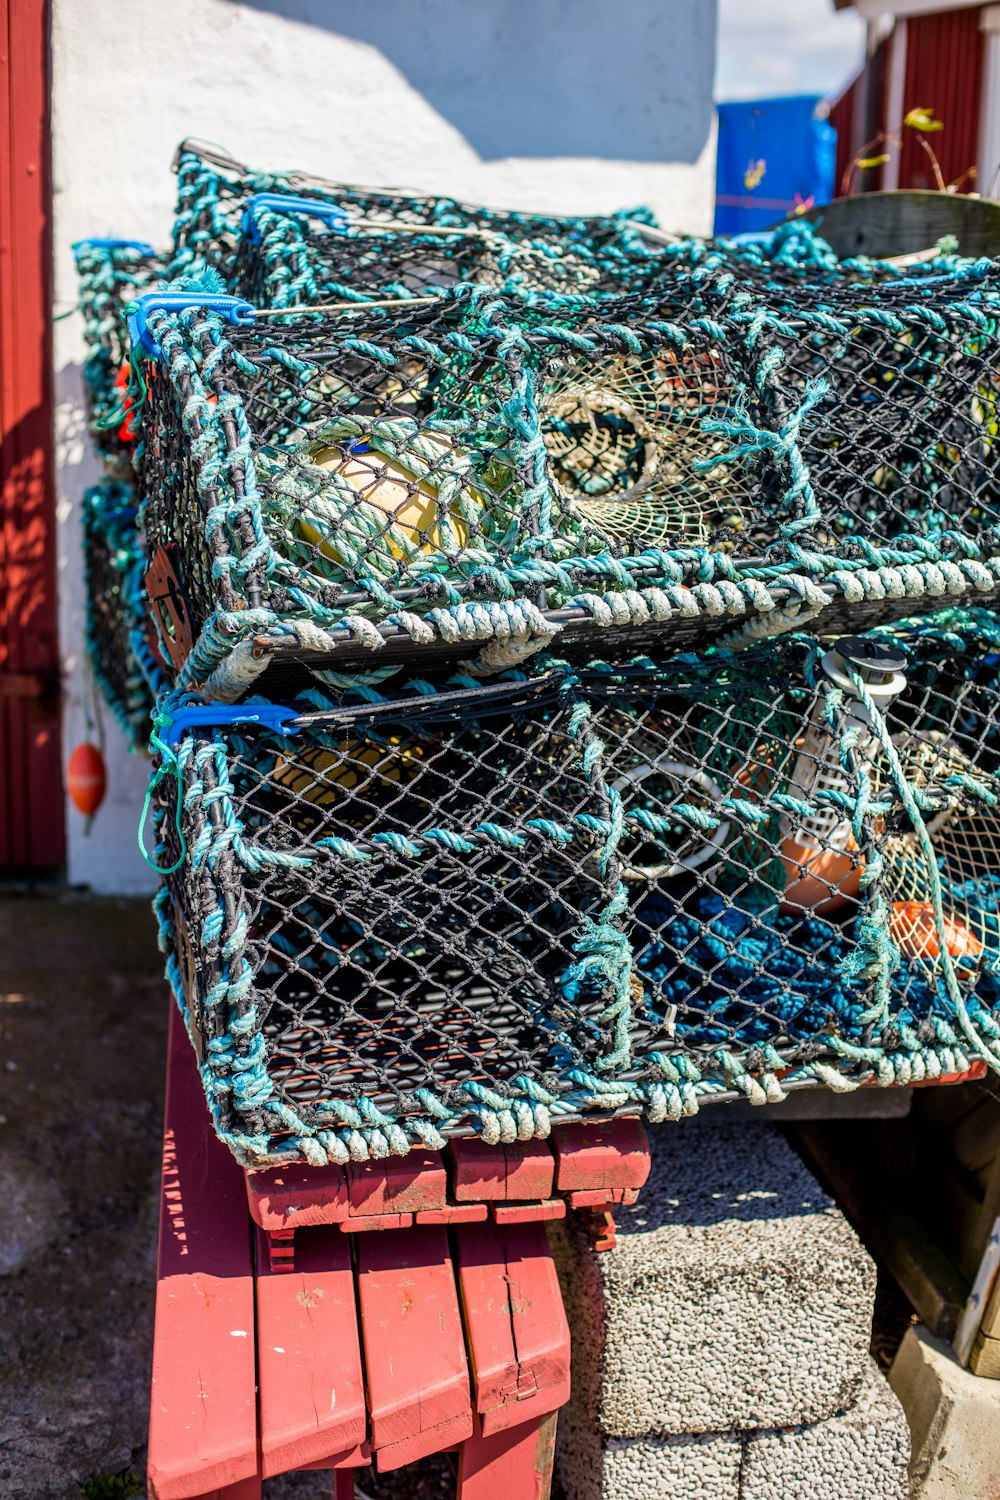 a pile of lobster traps sitting on top of a red bench